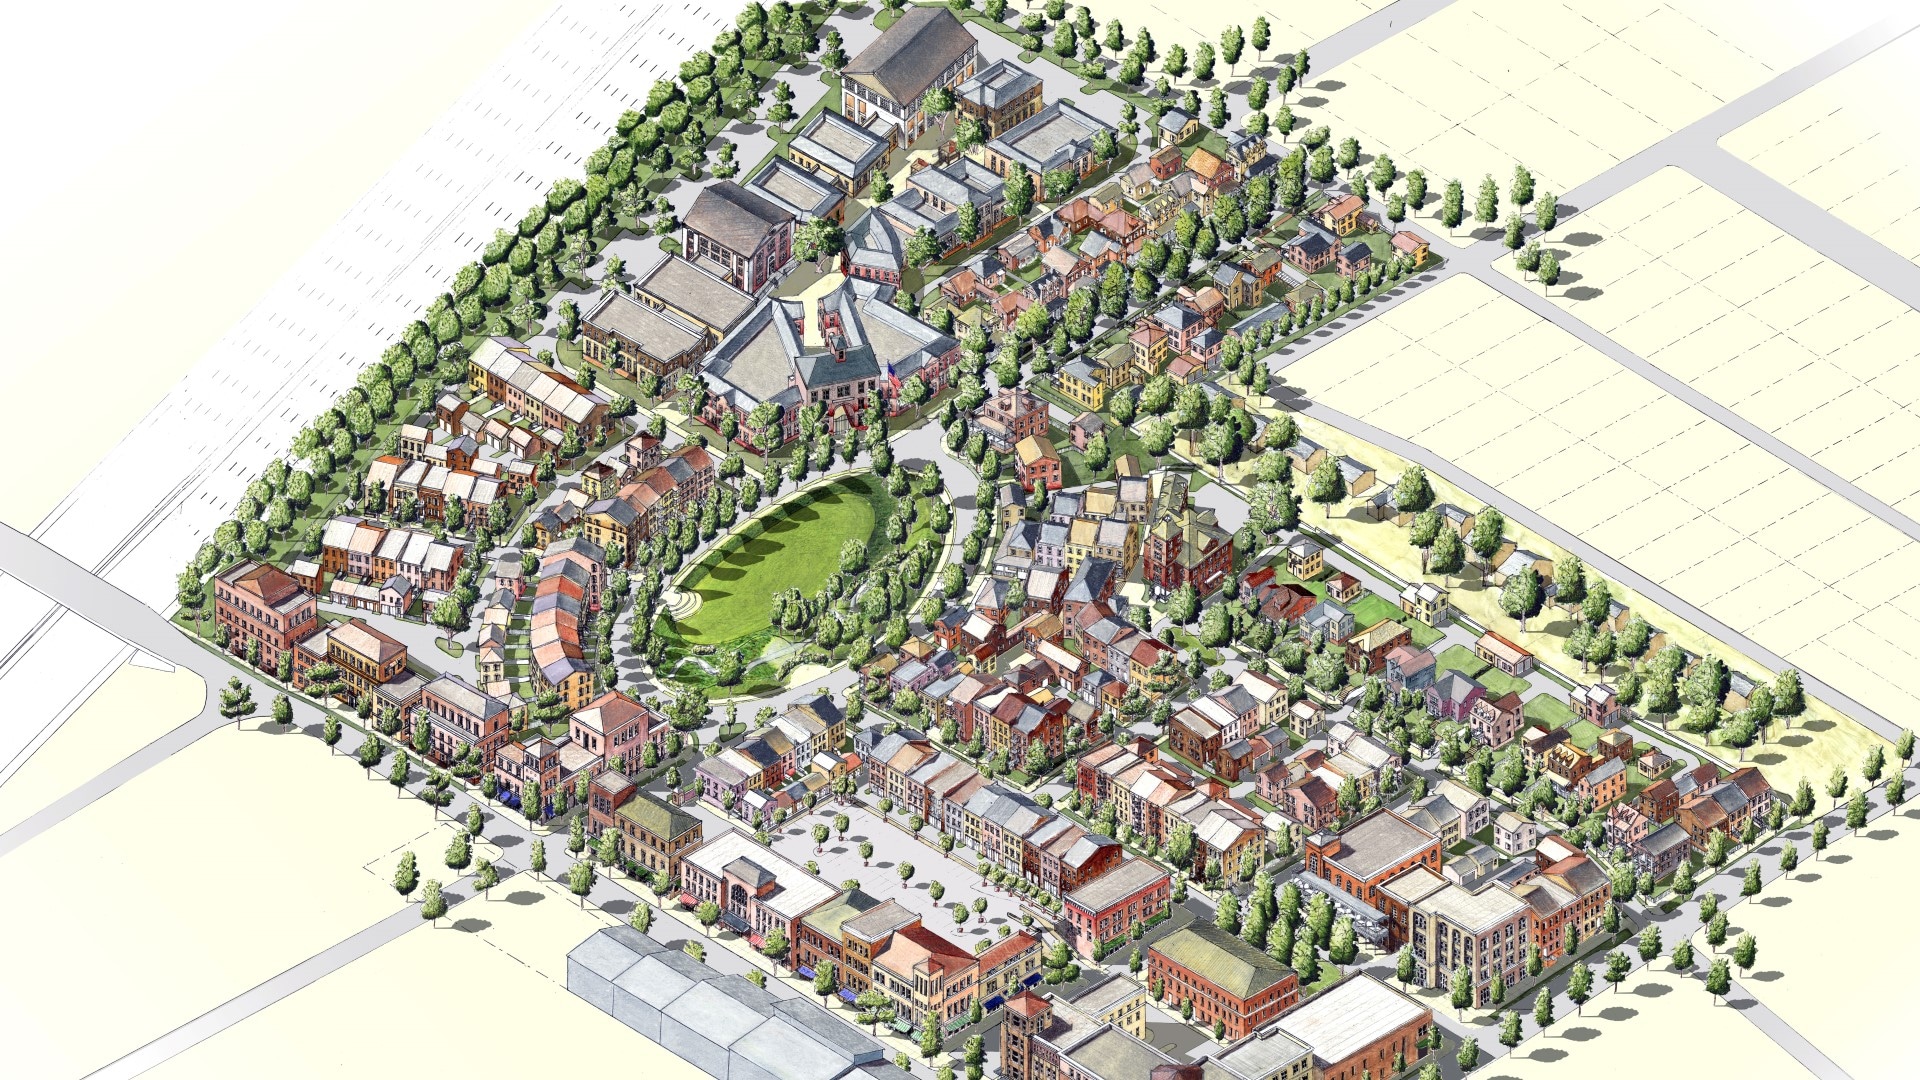 Glenwood Park a new urbanism Sustainable Community Development by TSW - Isometric hand rendering depicting the master plan